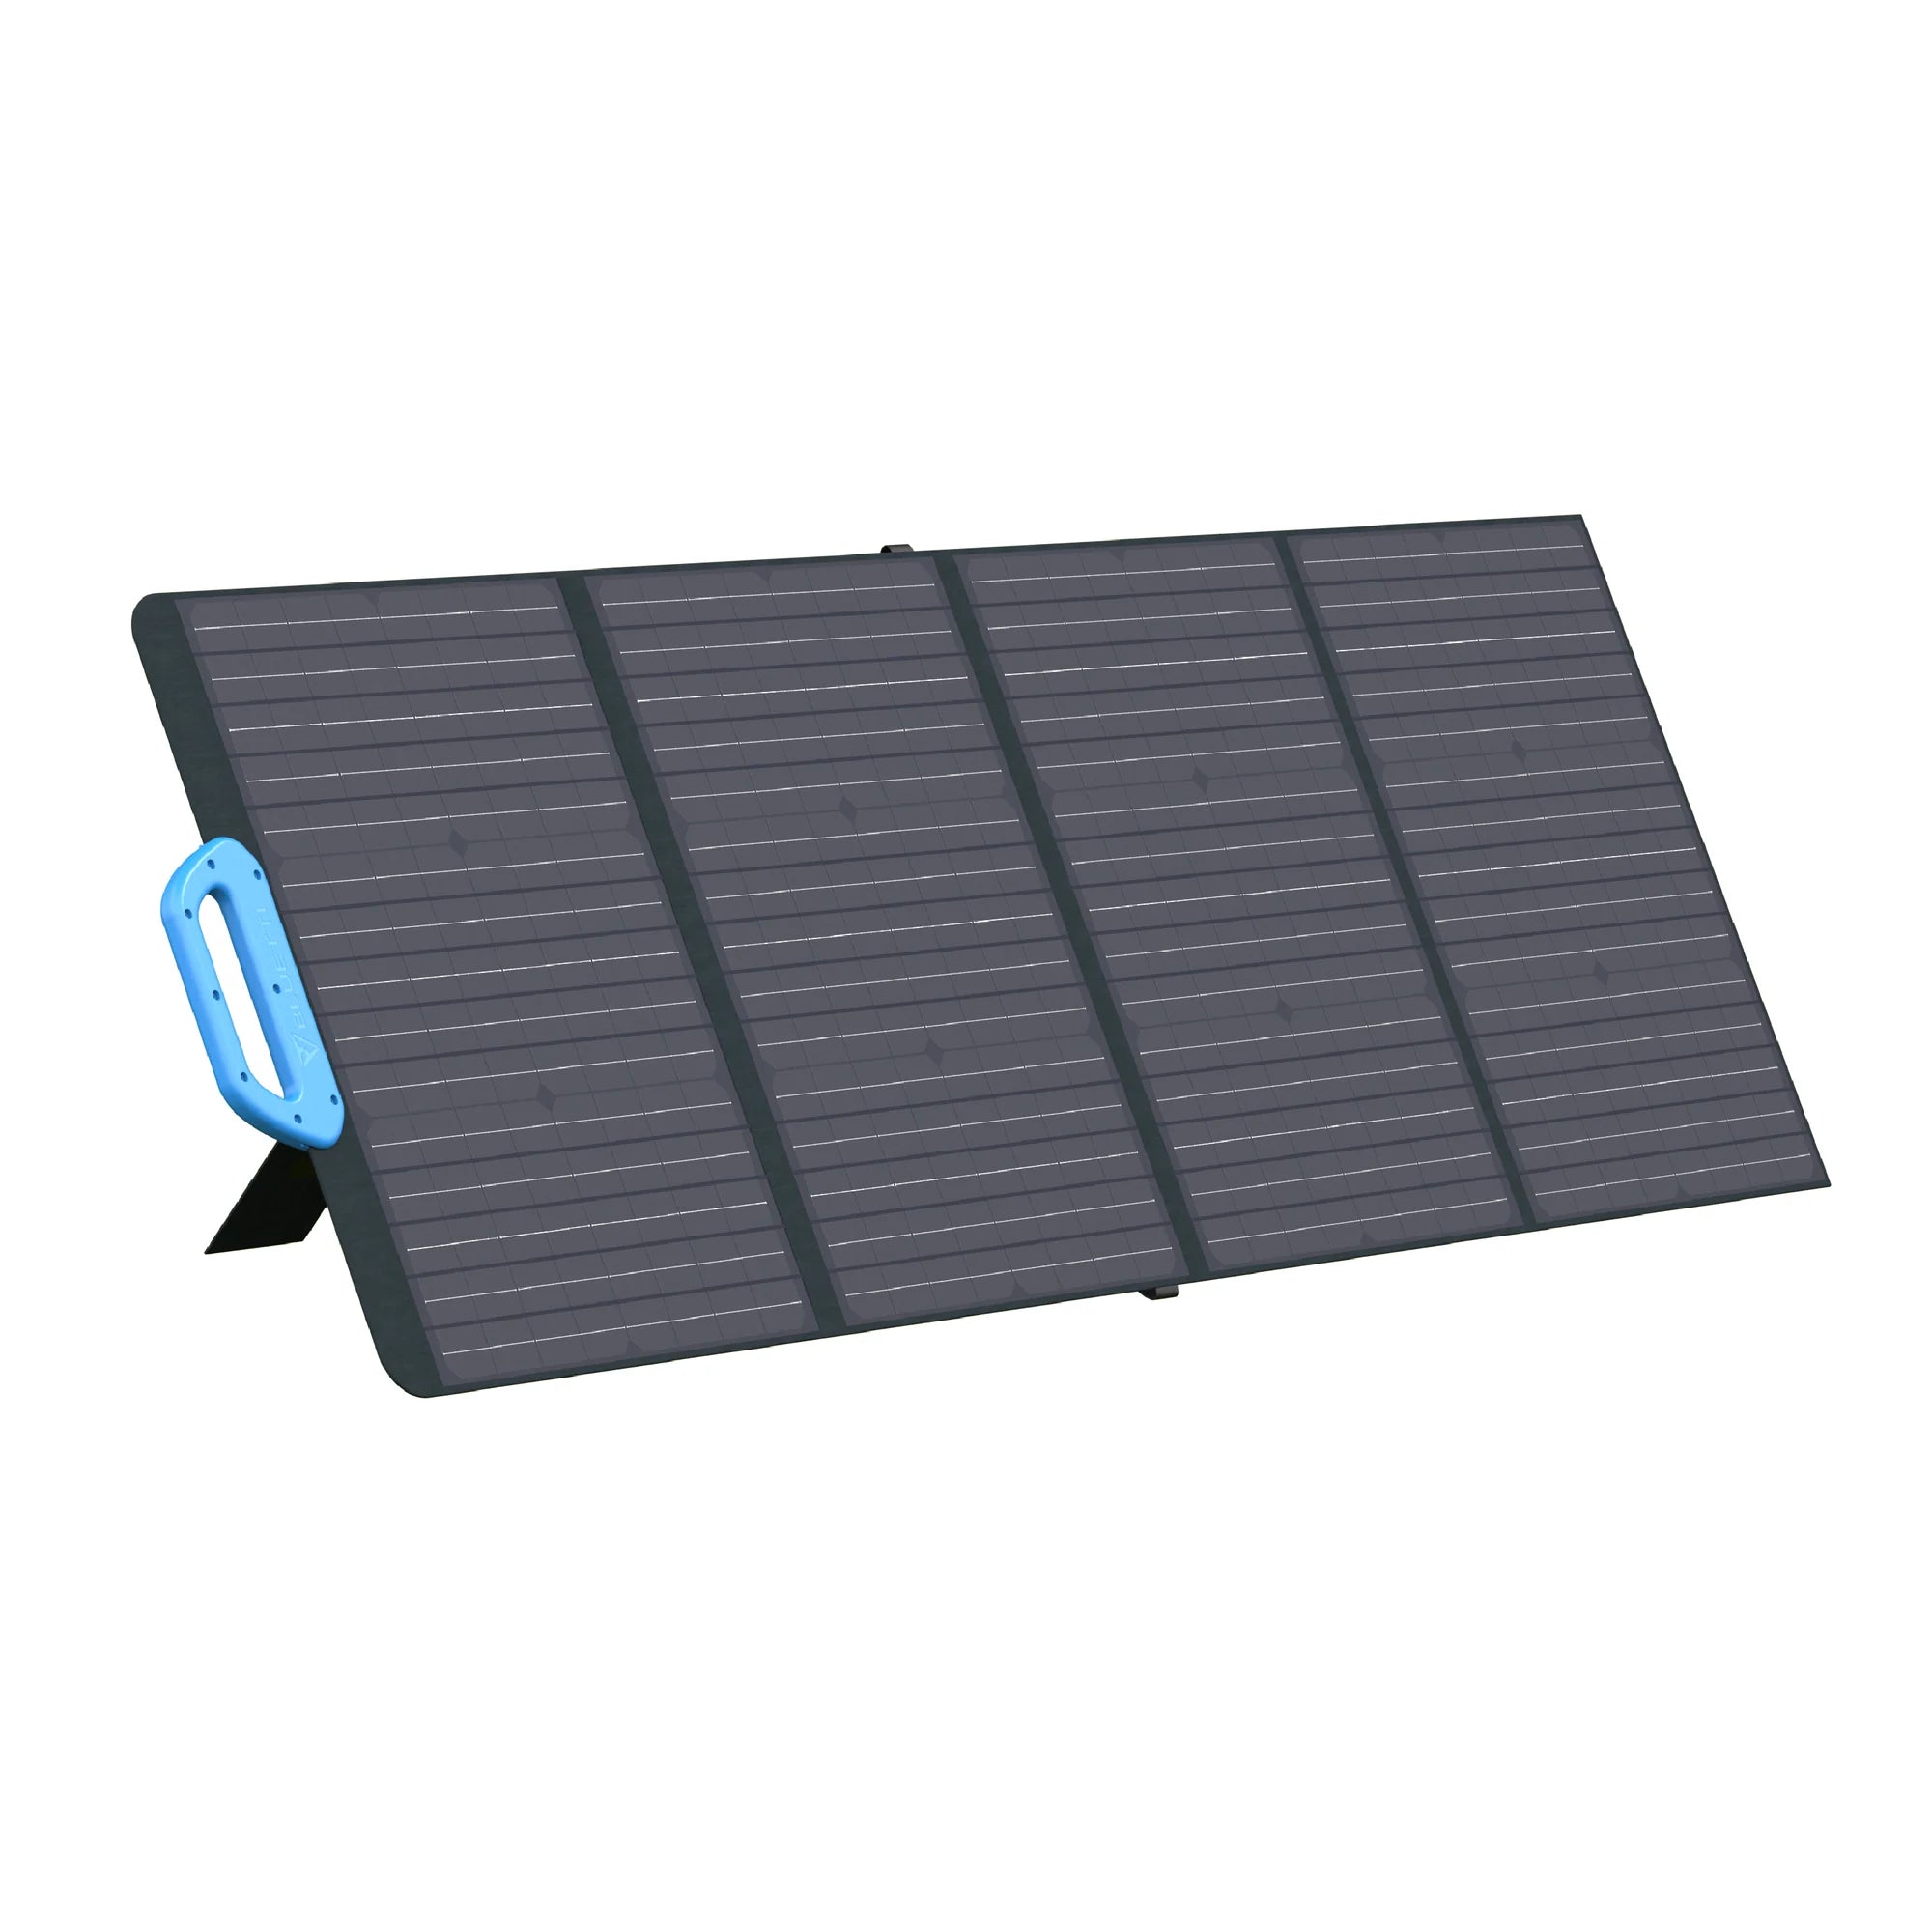 BLUETTI PV120 Solar Panel with 120W power review